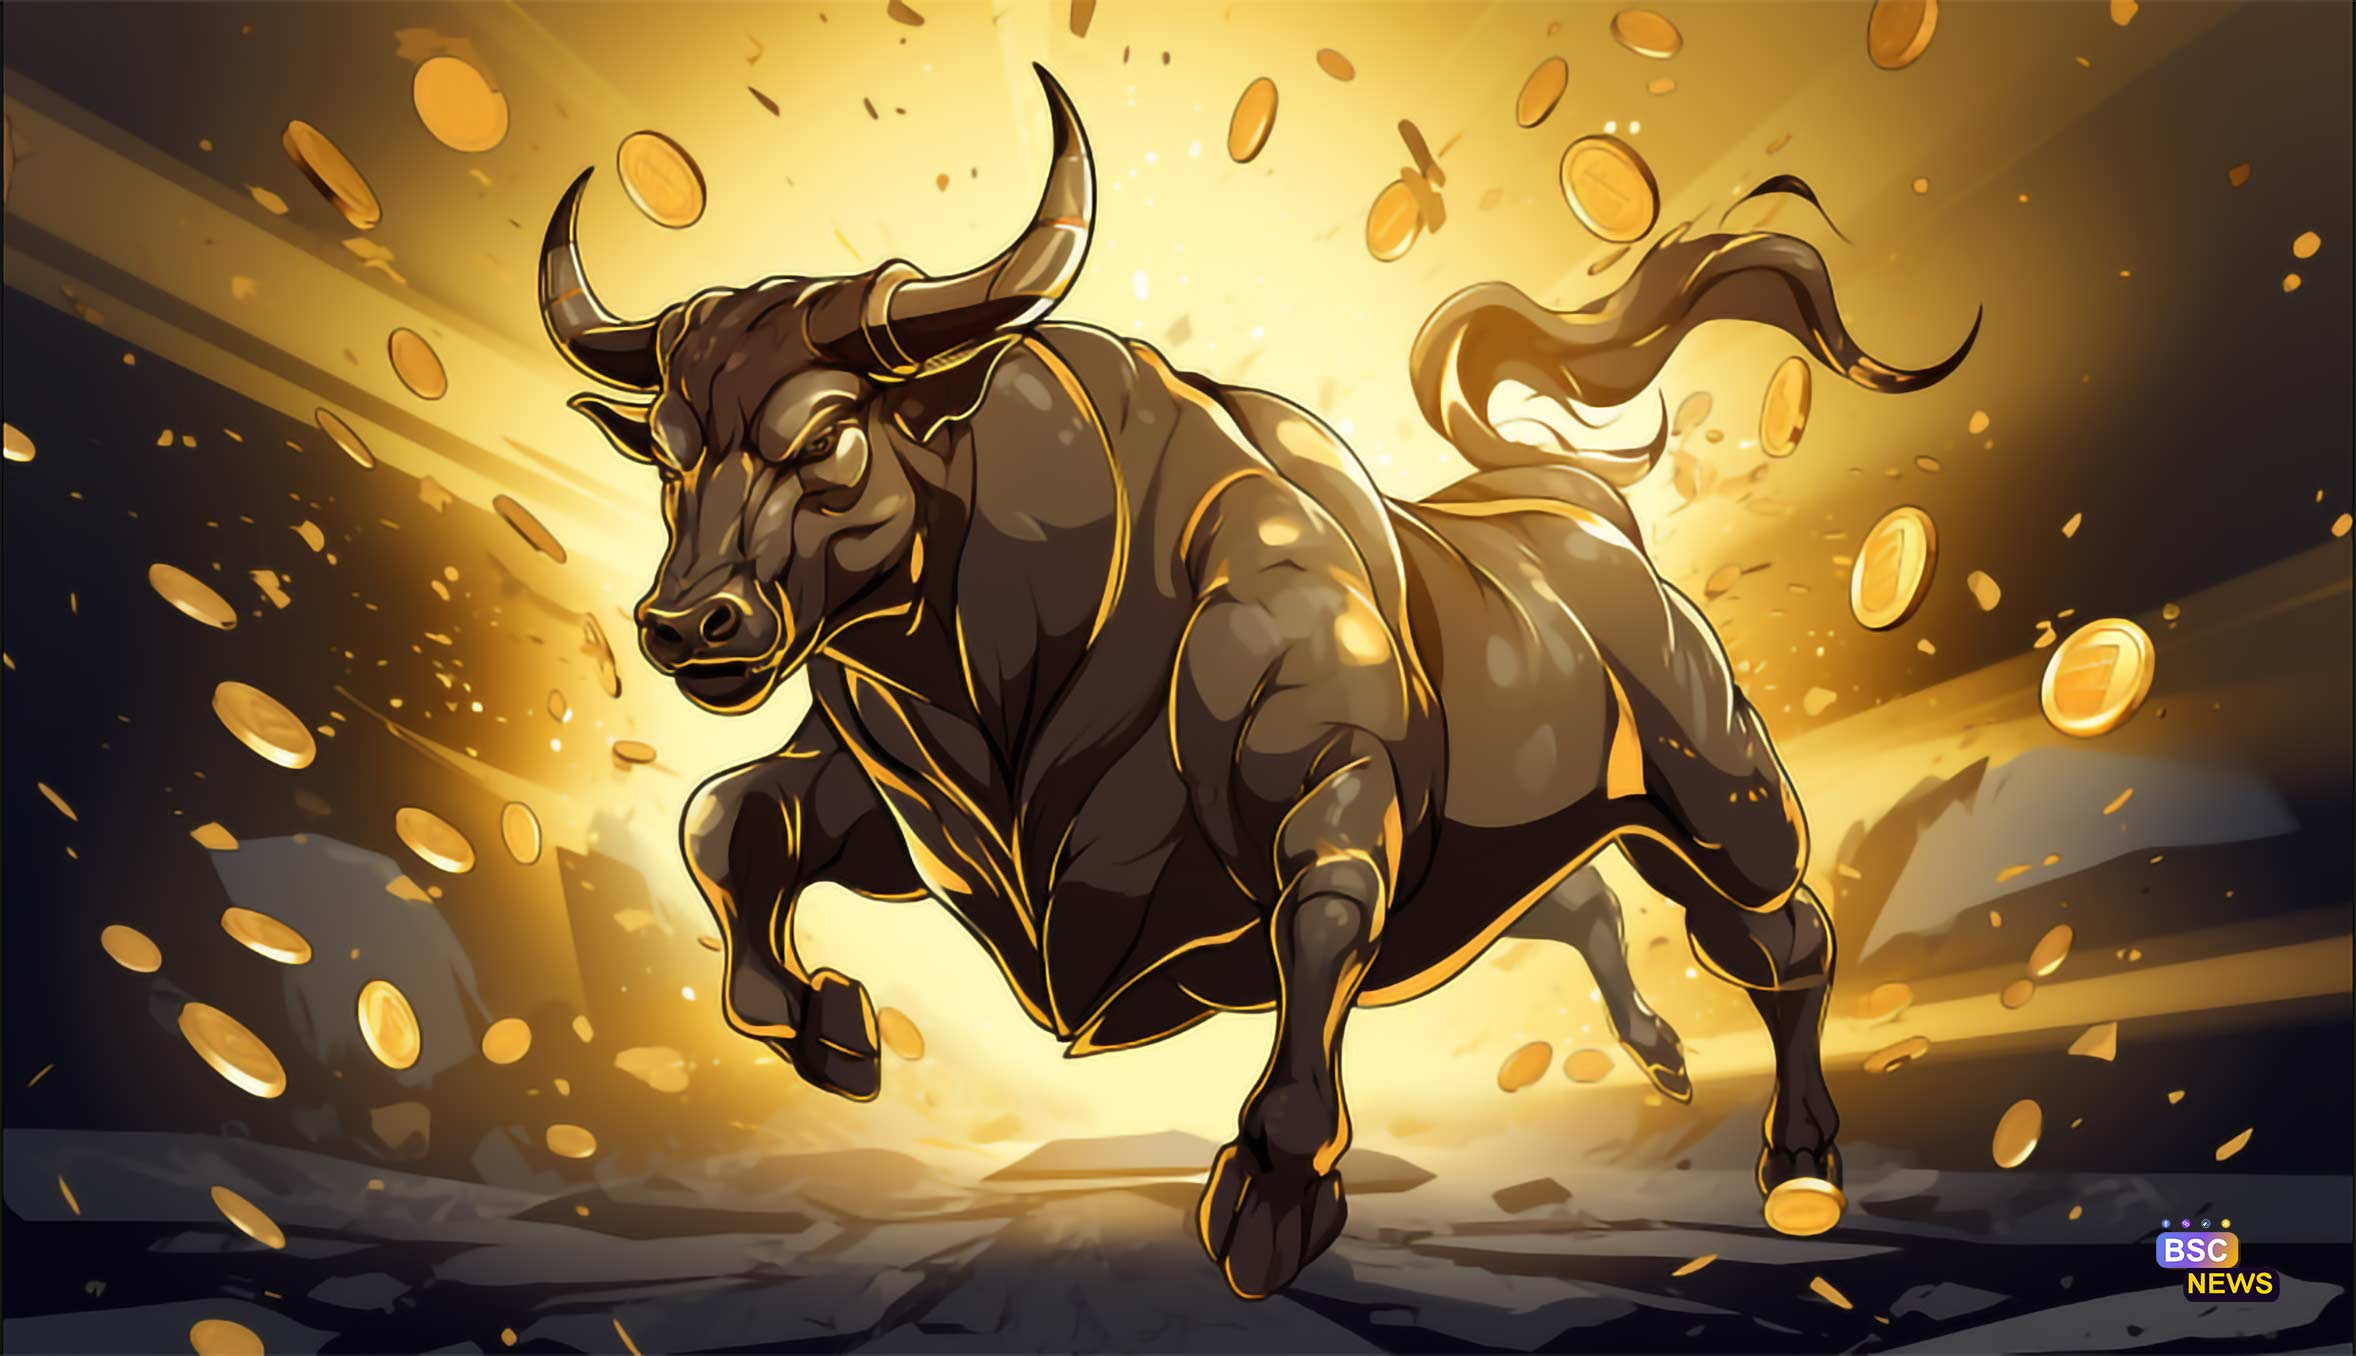 I Went and Tried Bull Bitcoin's Non-KYC Buying and It's Great! \ stacker news ~bitcoin